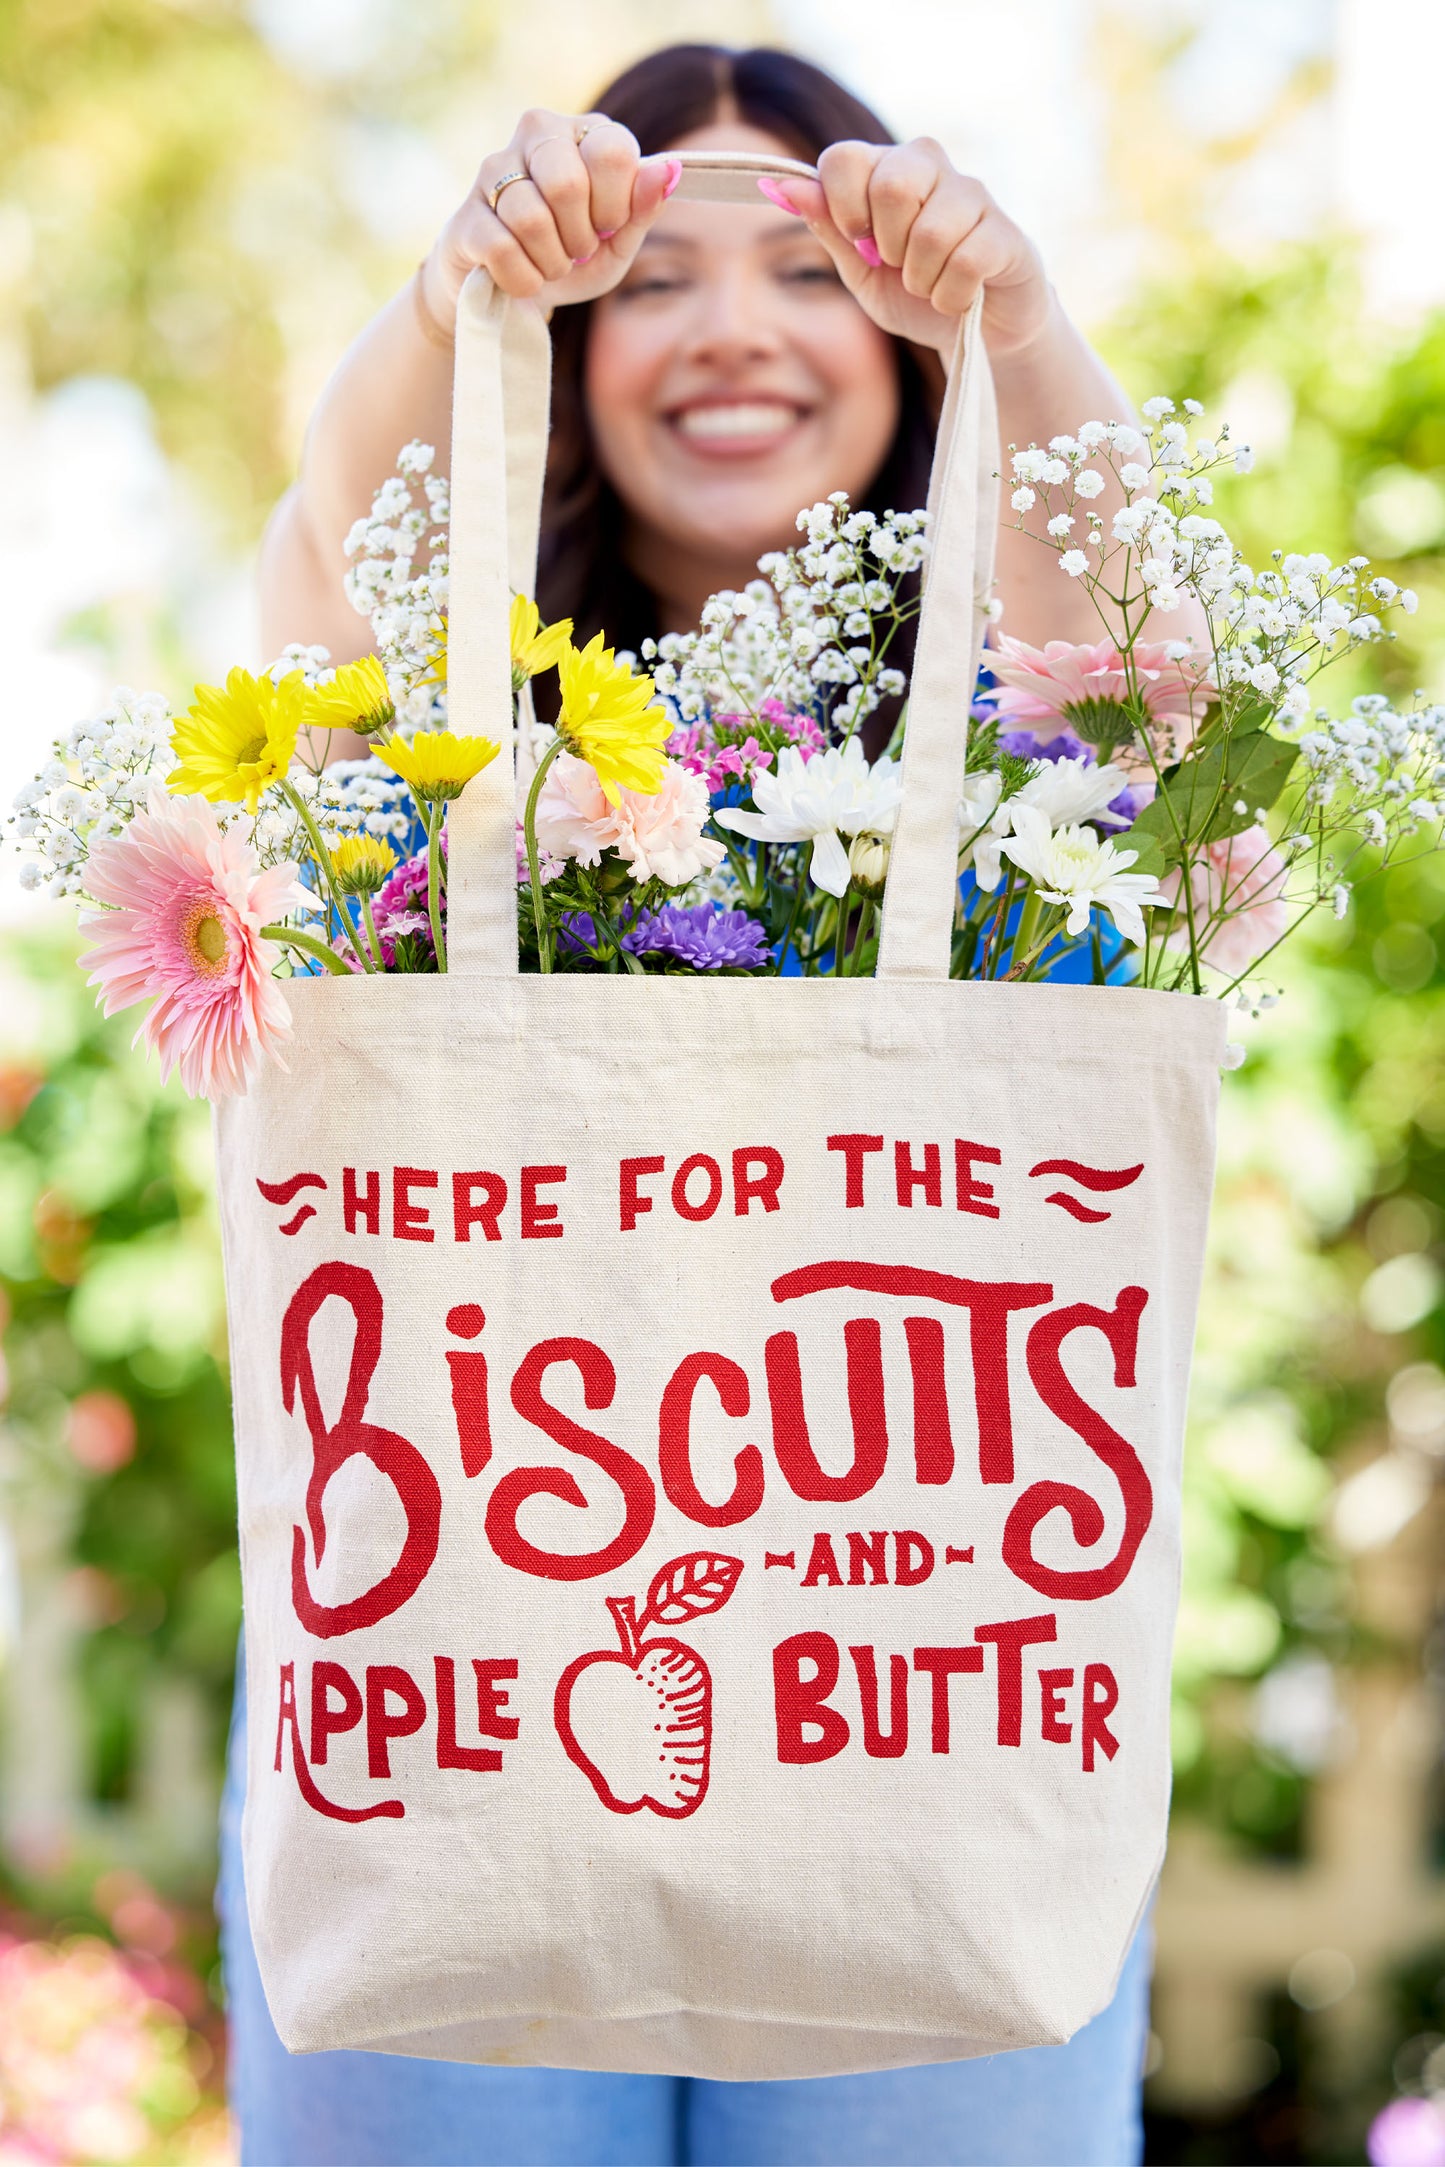 Biscuits and Apple Butter Tote Bag